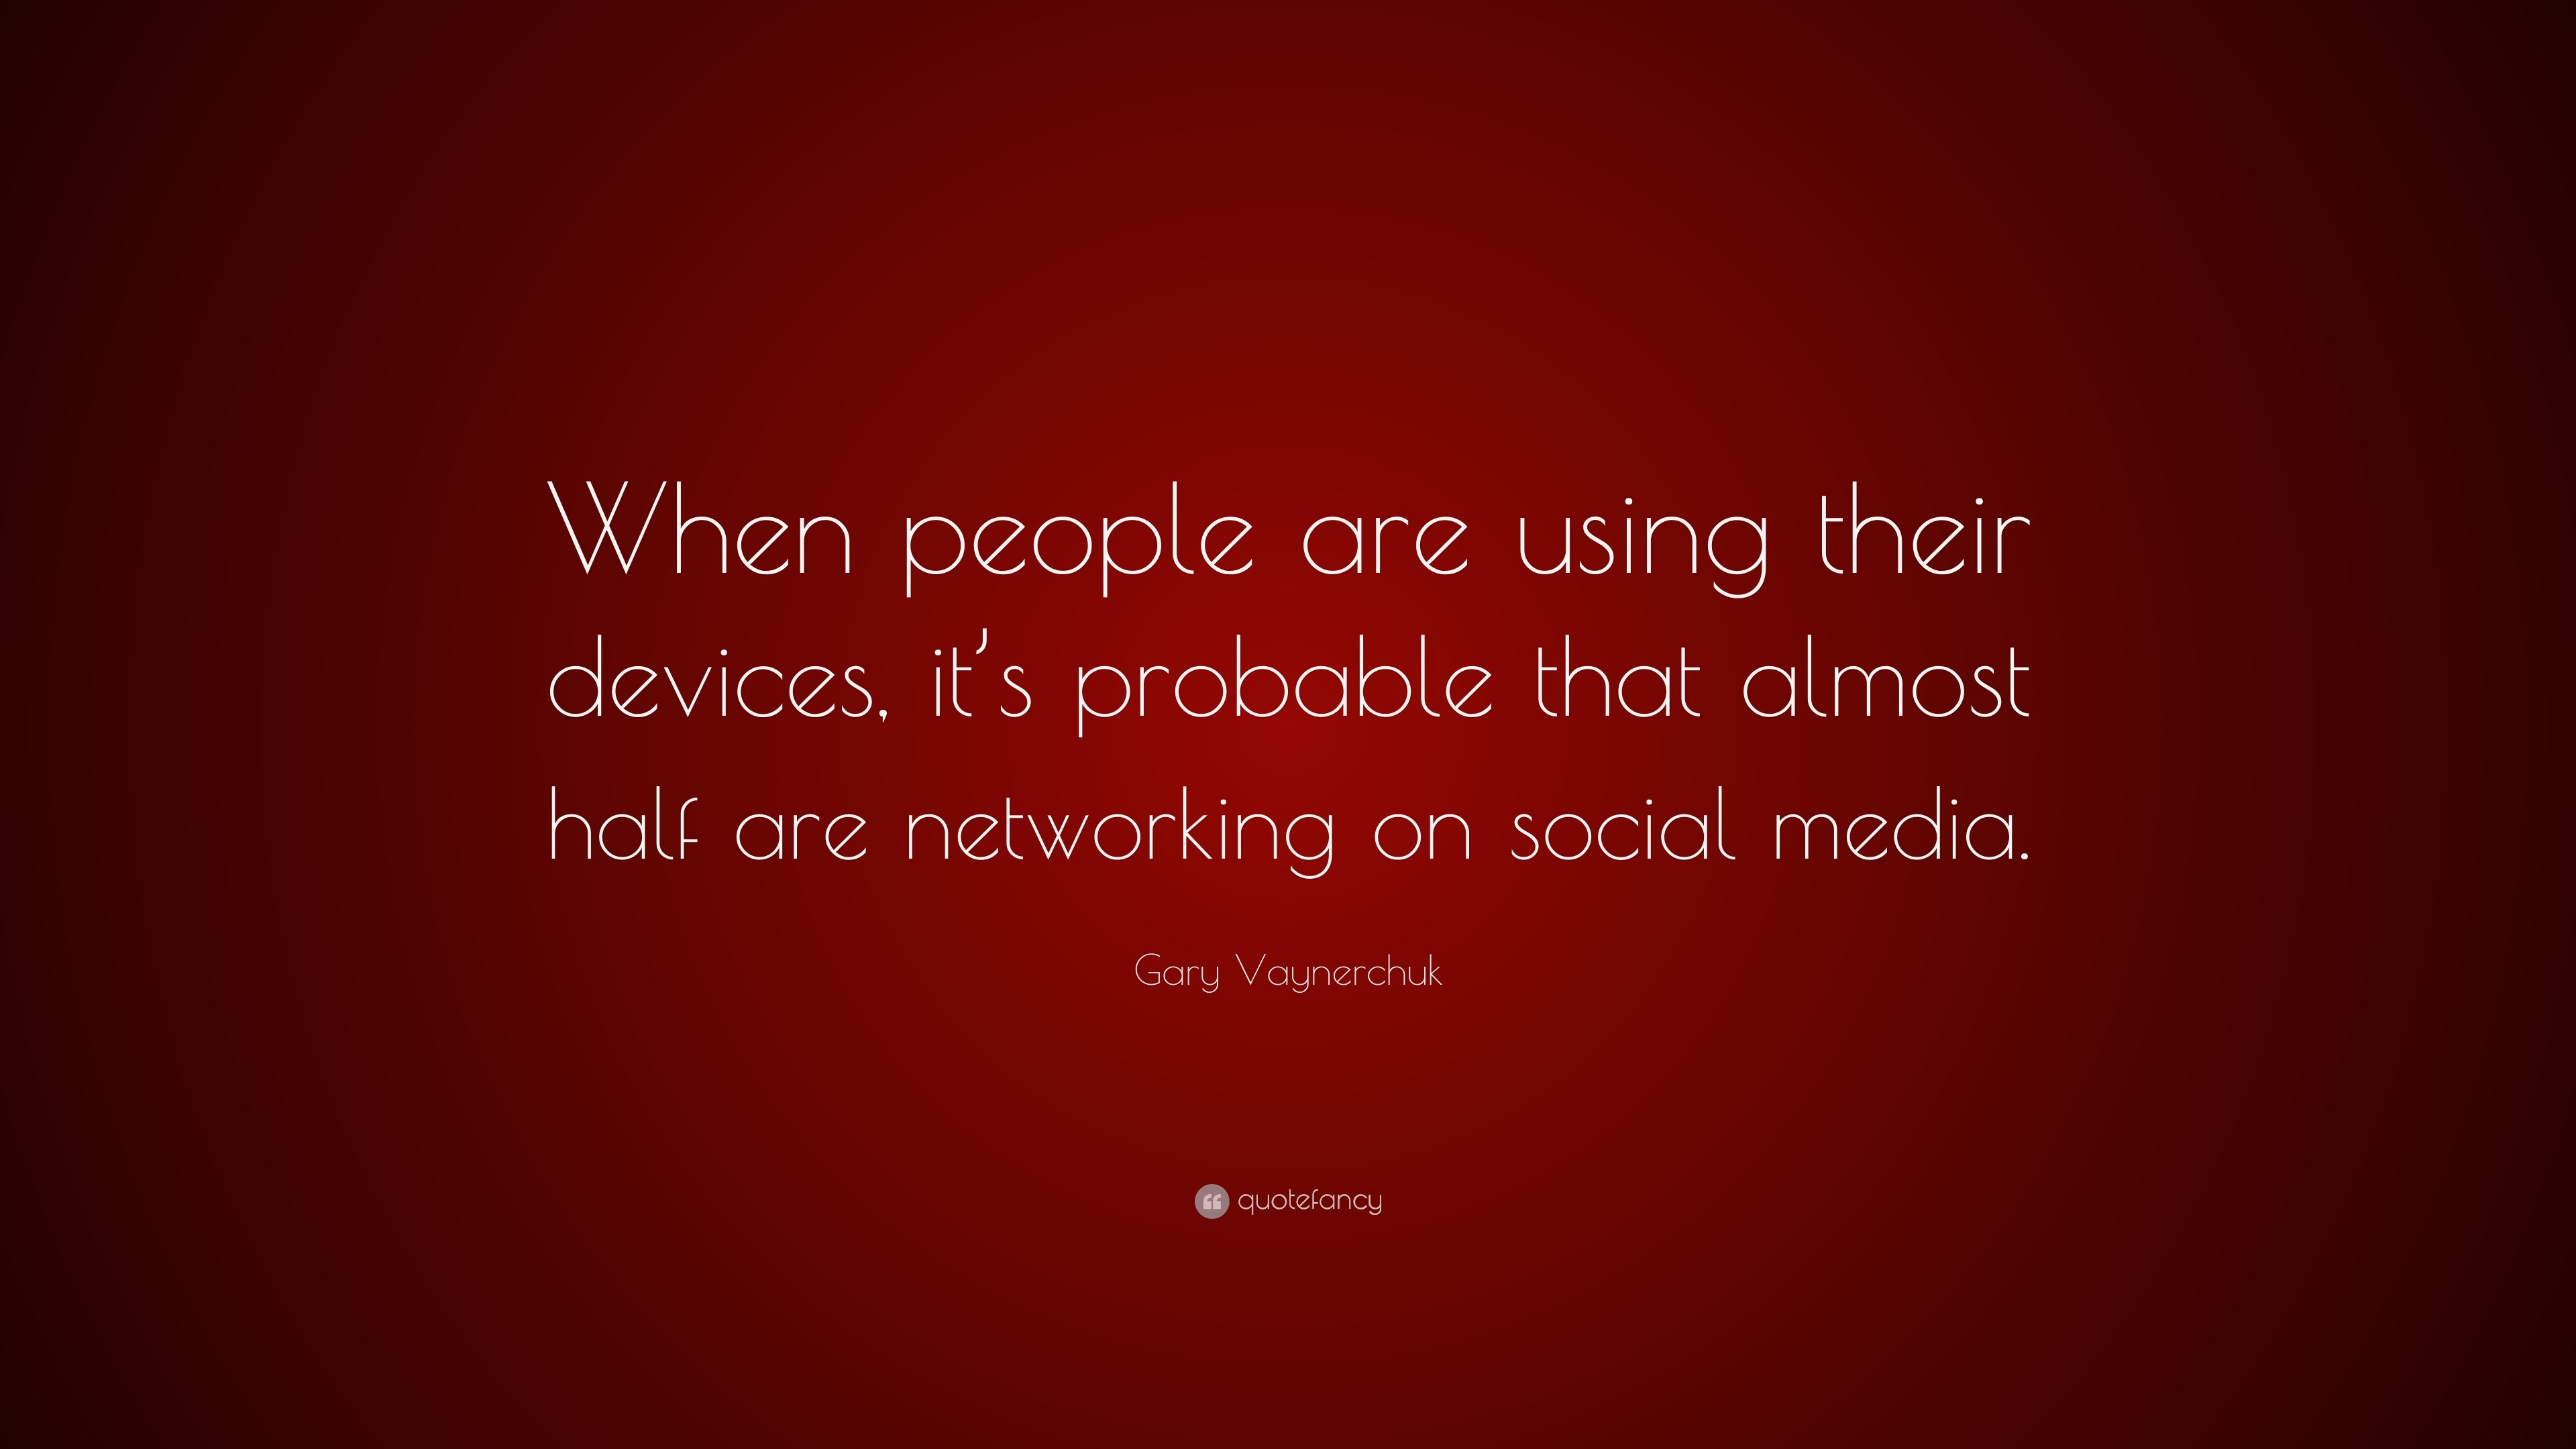 Gary Vaynerchuk Quote: “When people are using their devices, it’s